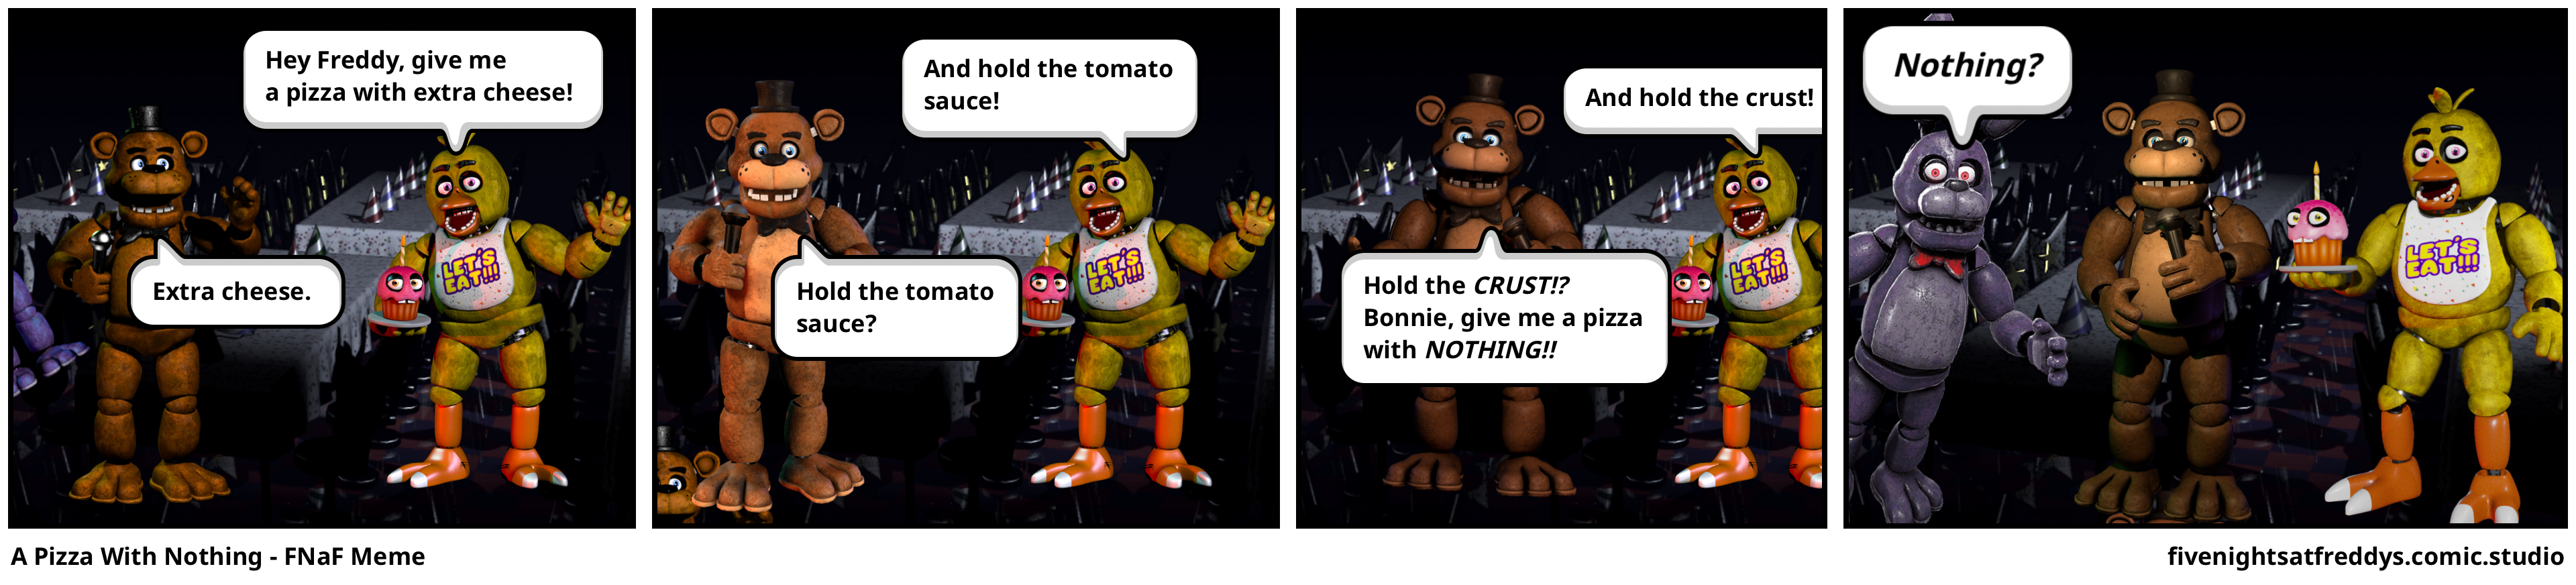 A Pizza With Nothing - FNaF Meme